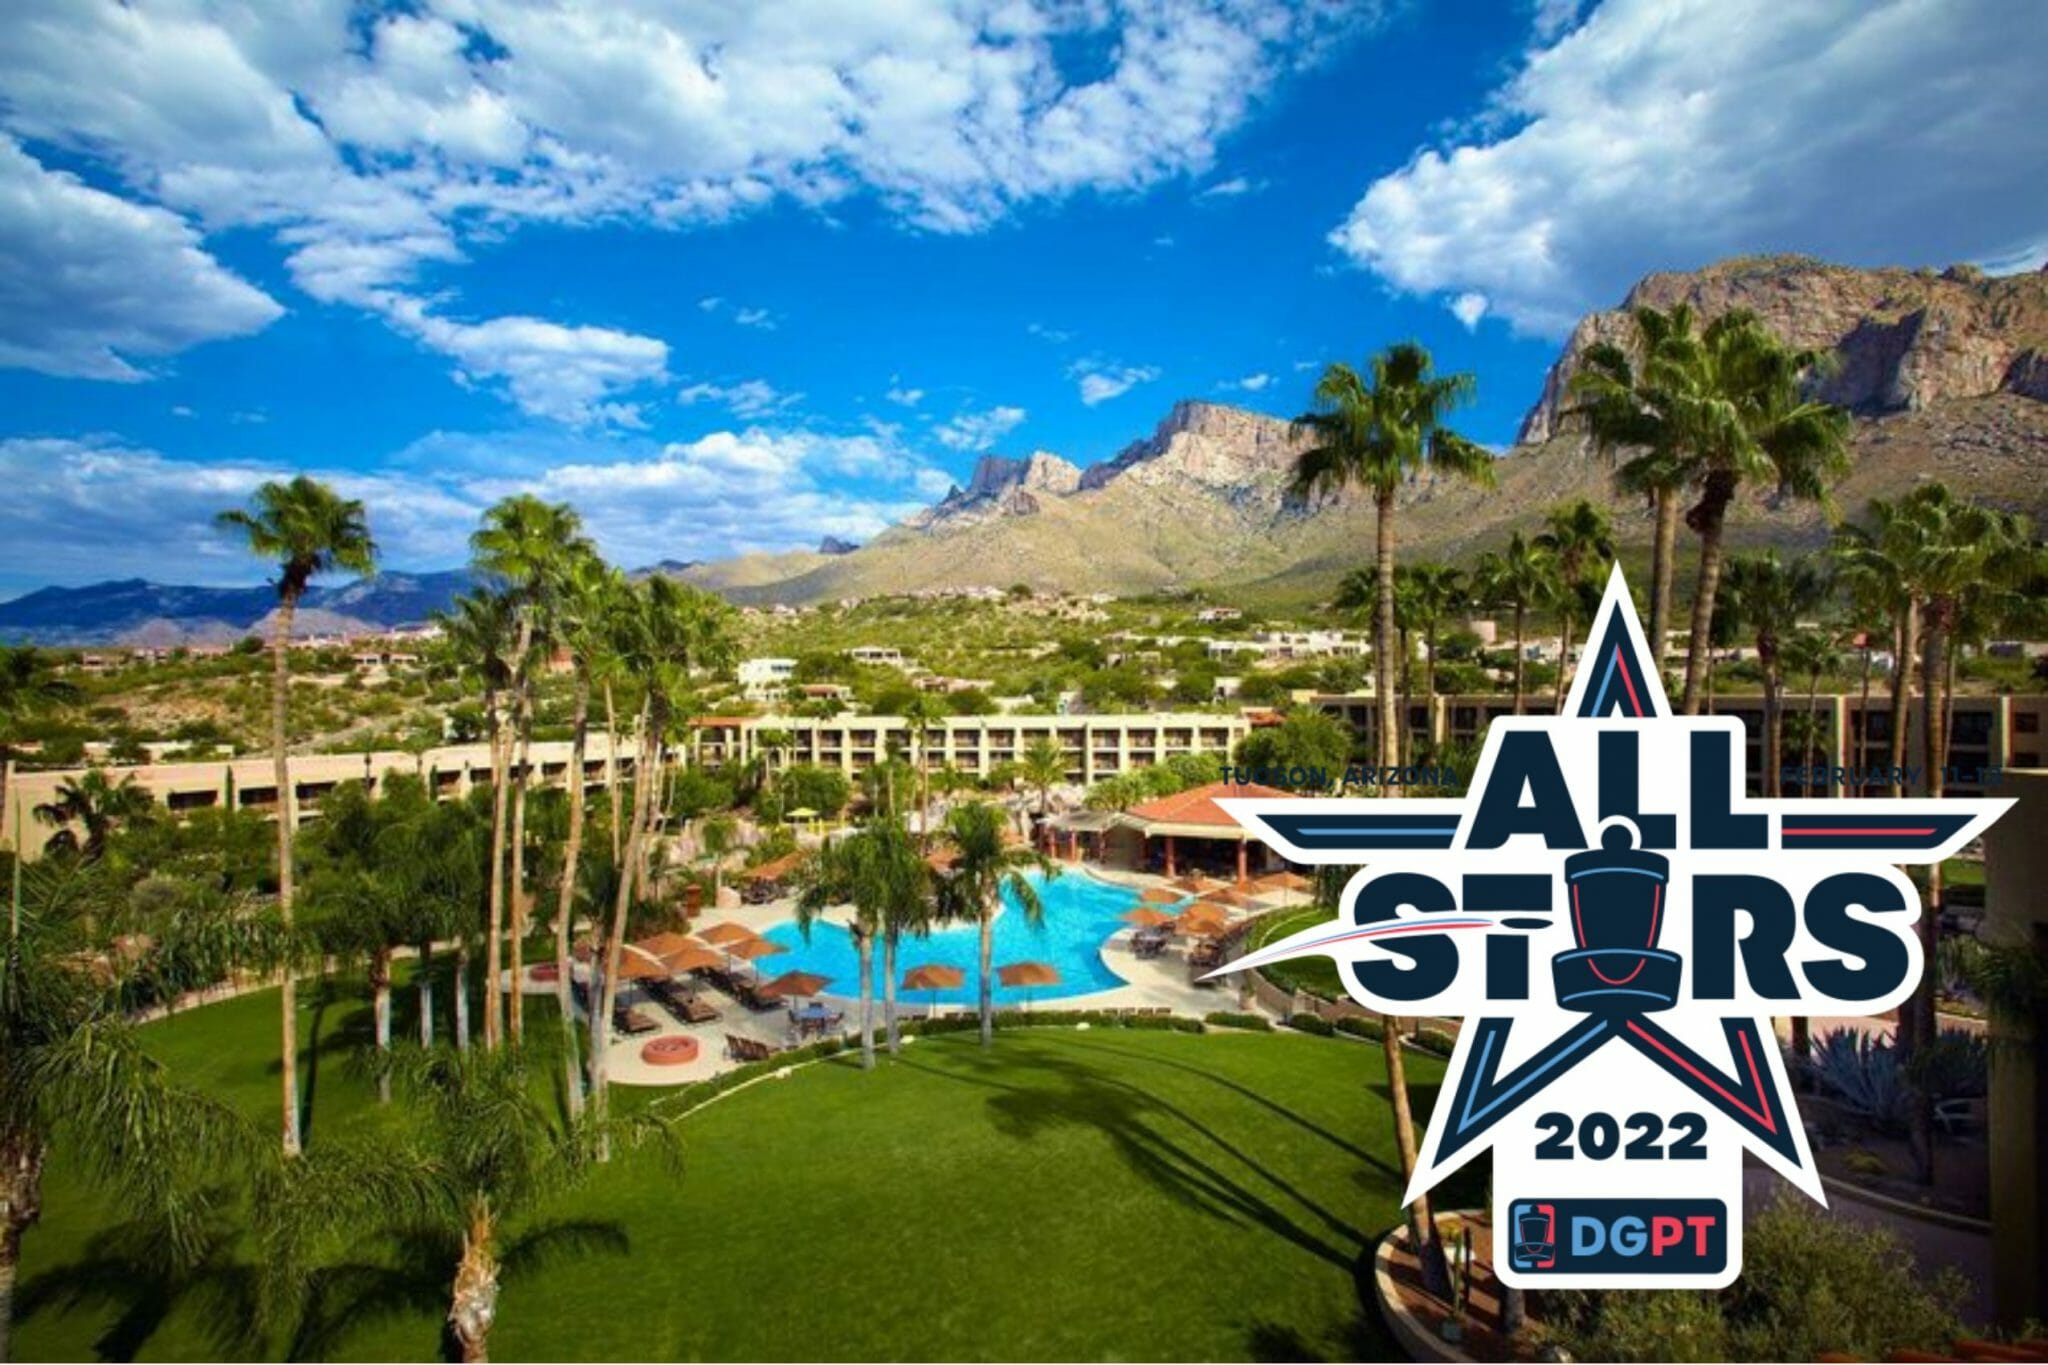 How to Watch the 2022 DGPT AllStar Weekend Ultiworld Disc Golf